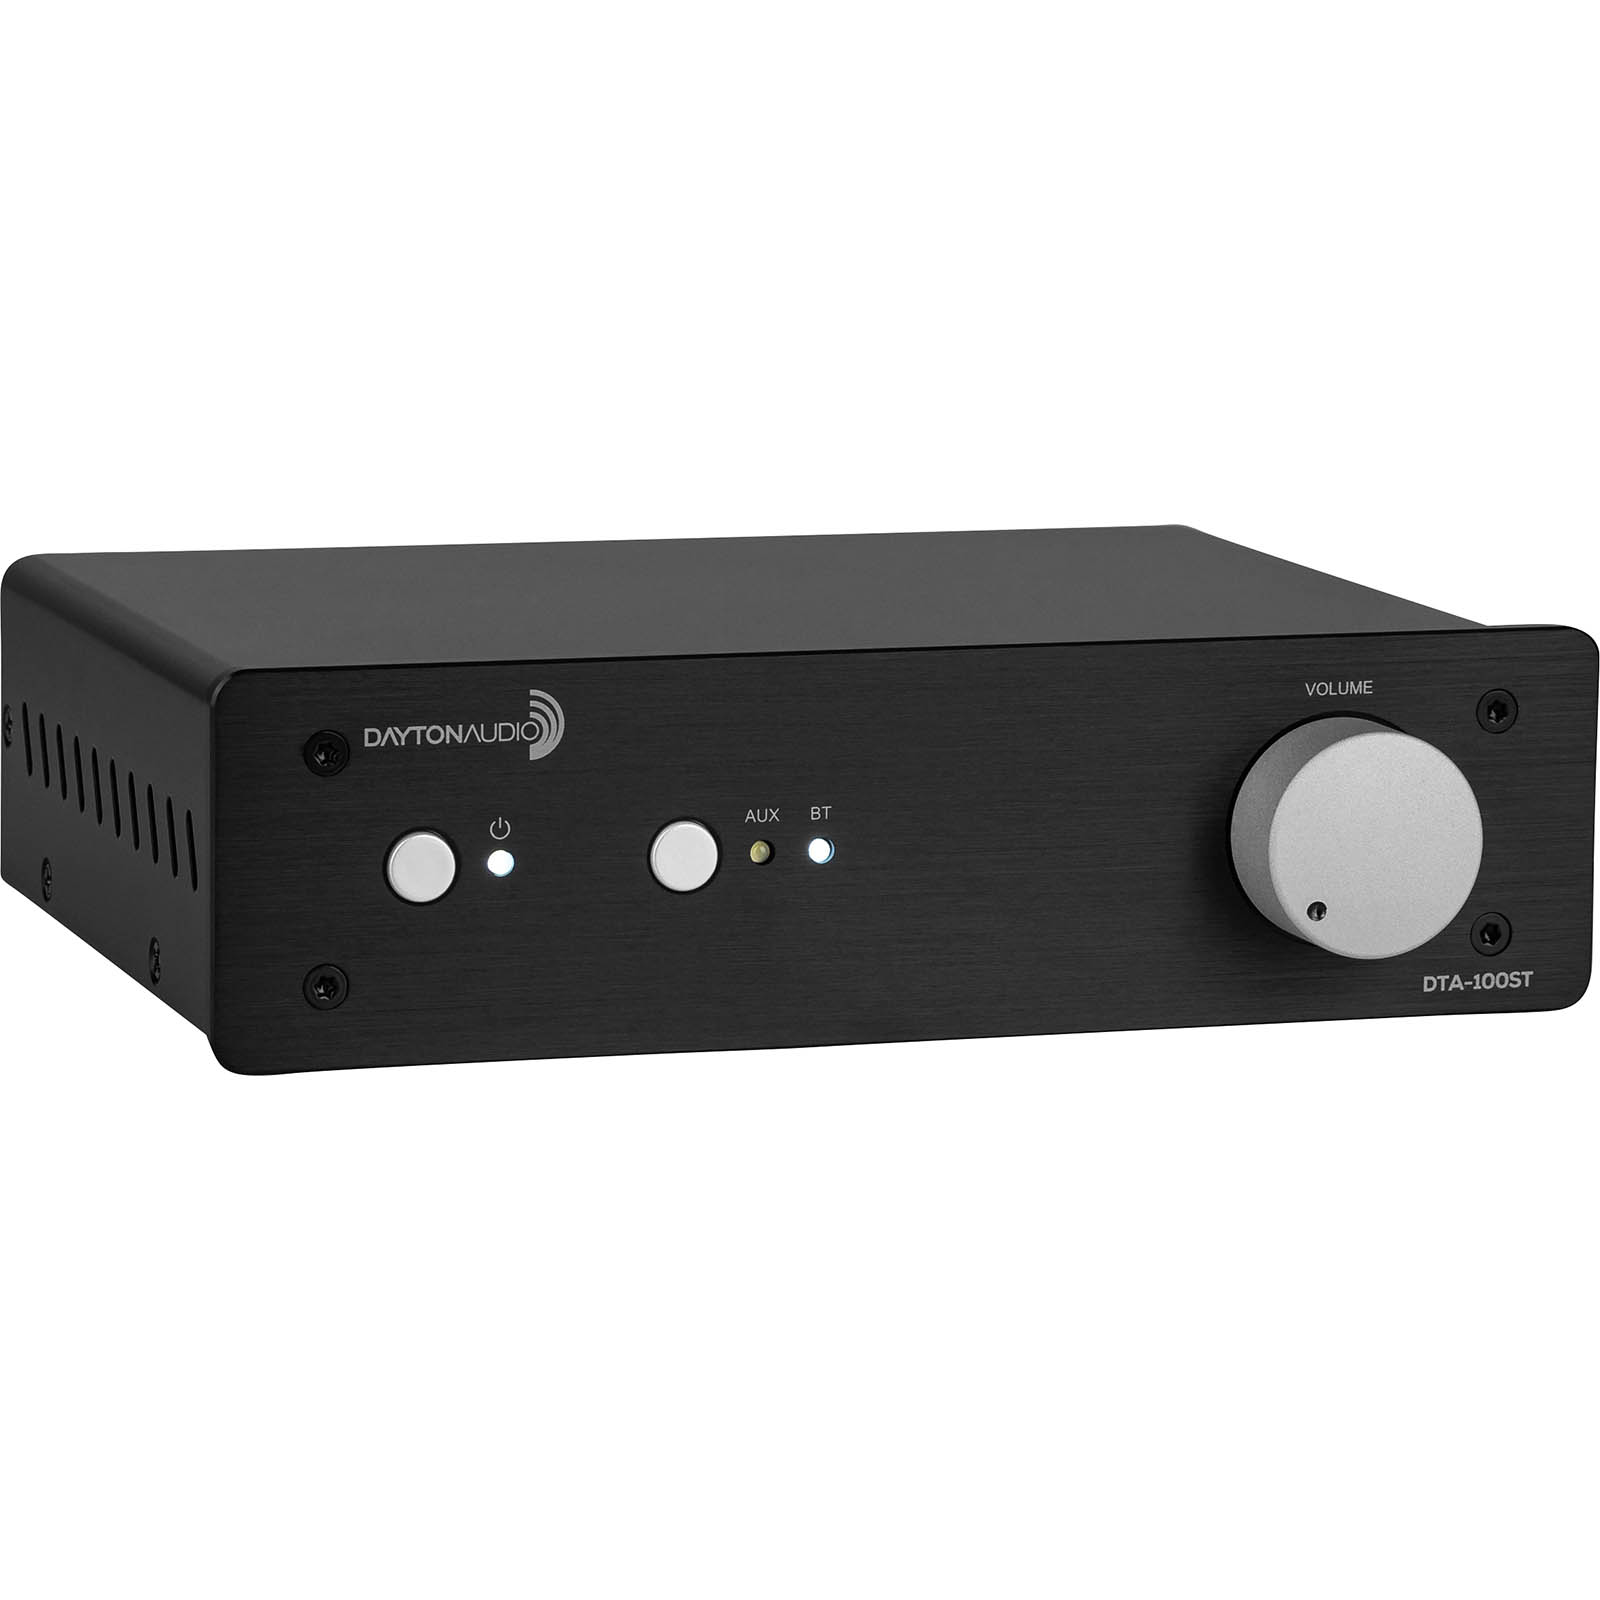 Image of the DTA100ST